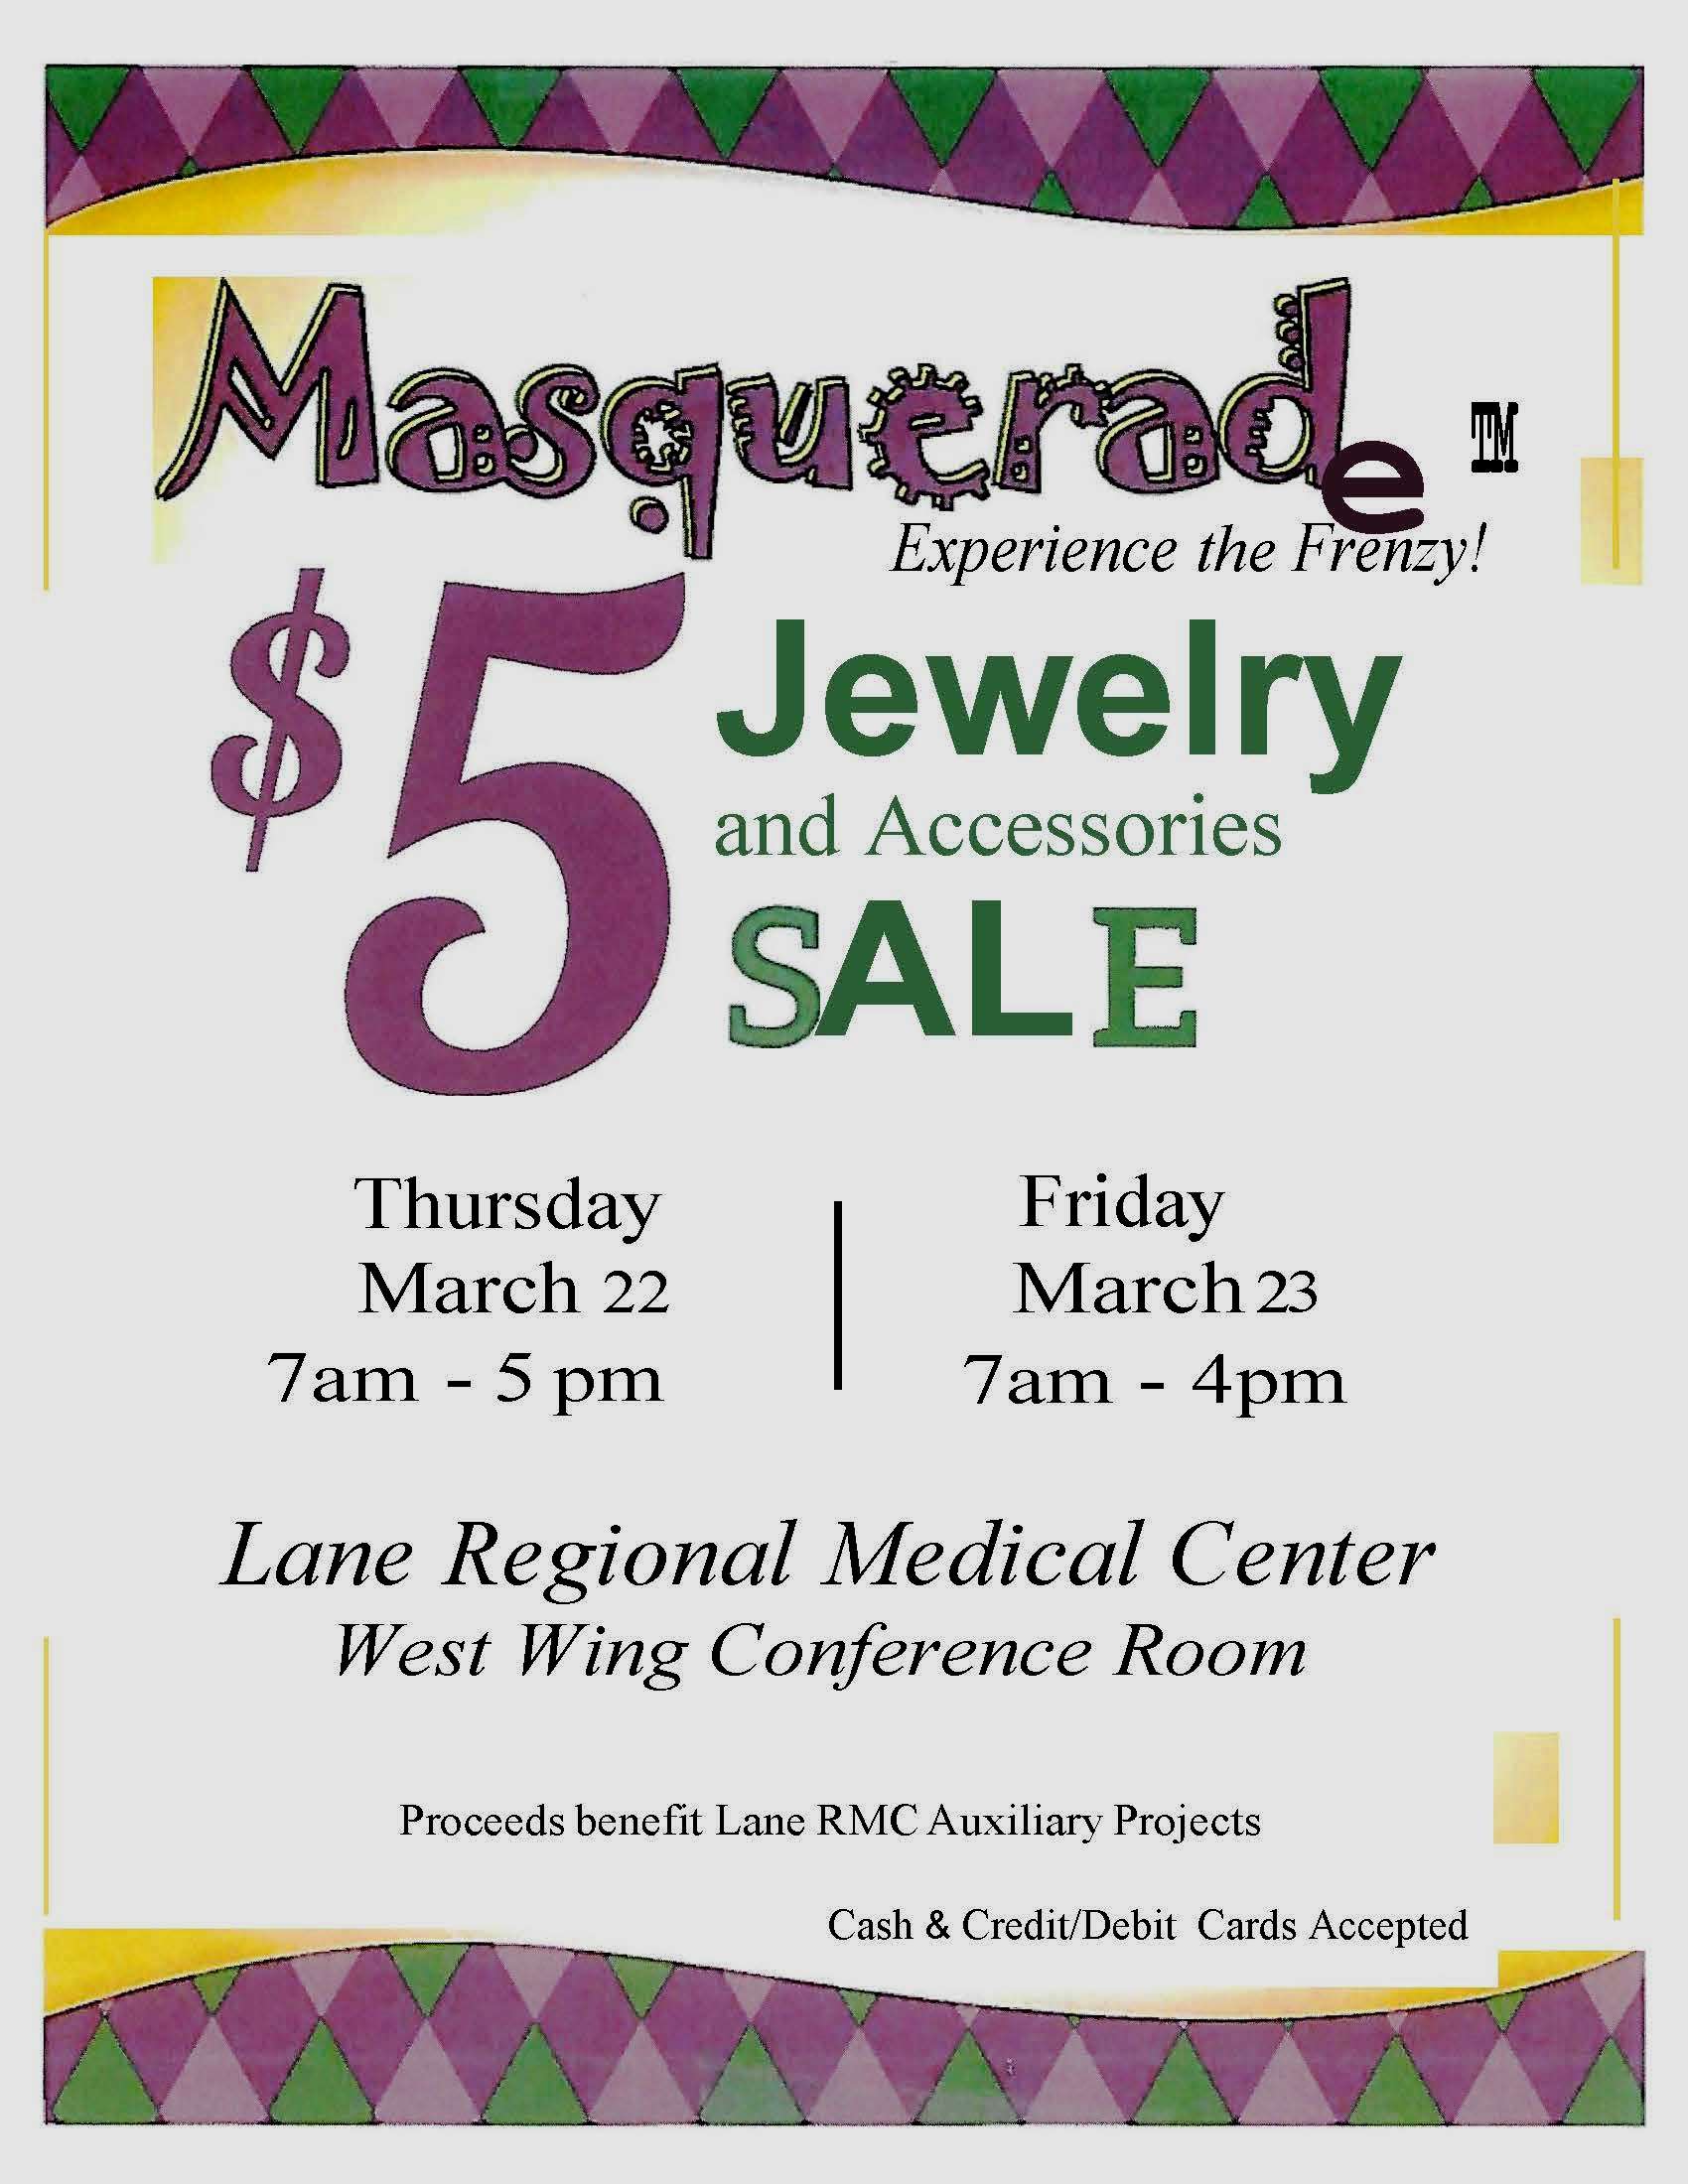 Lane Auxiliary to host $5 jewelry and accesories sale